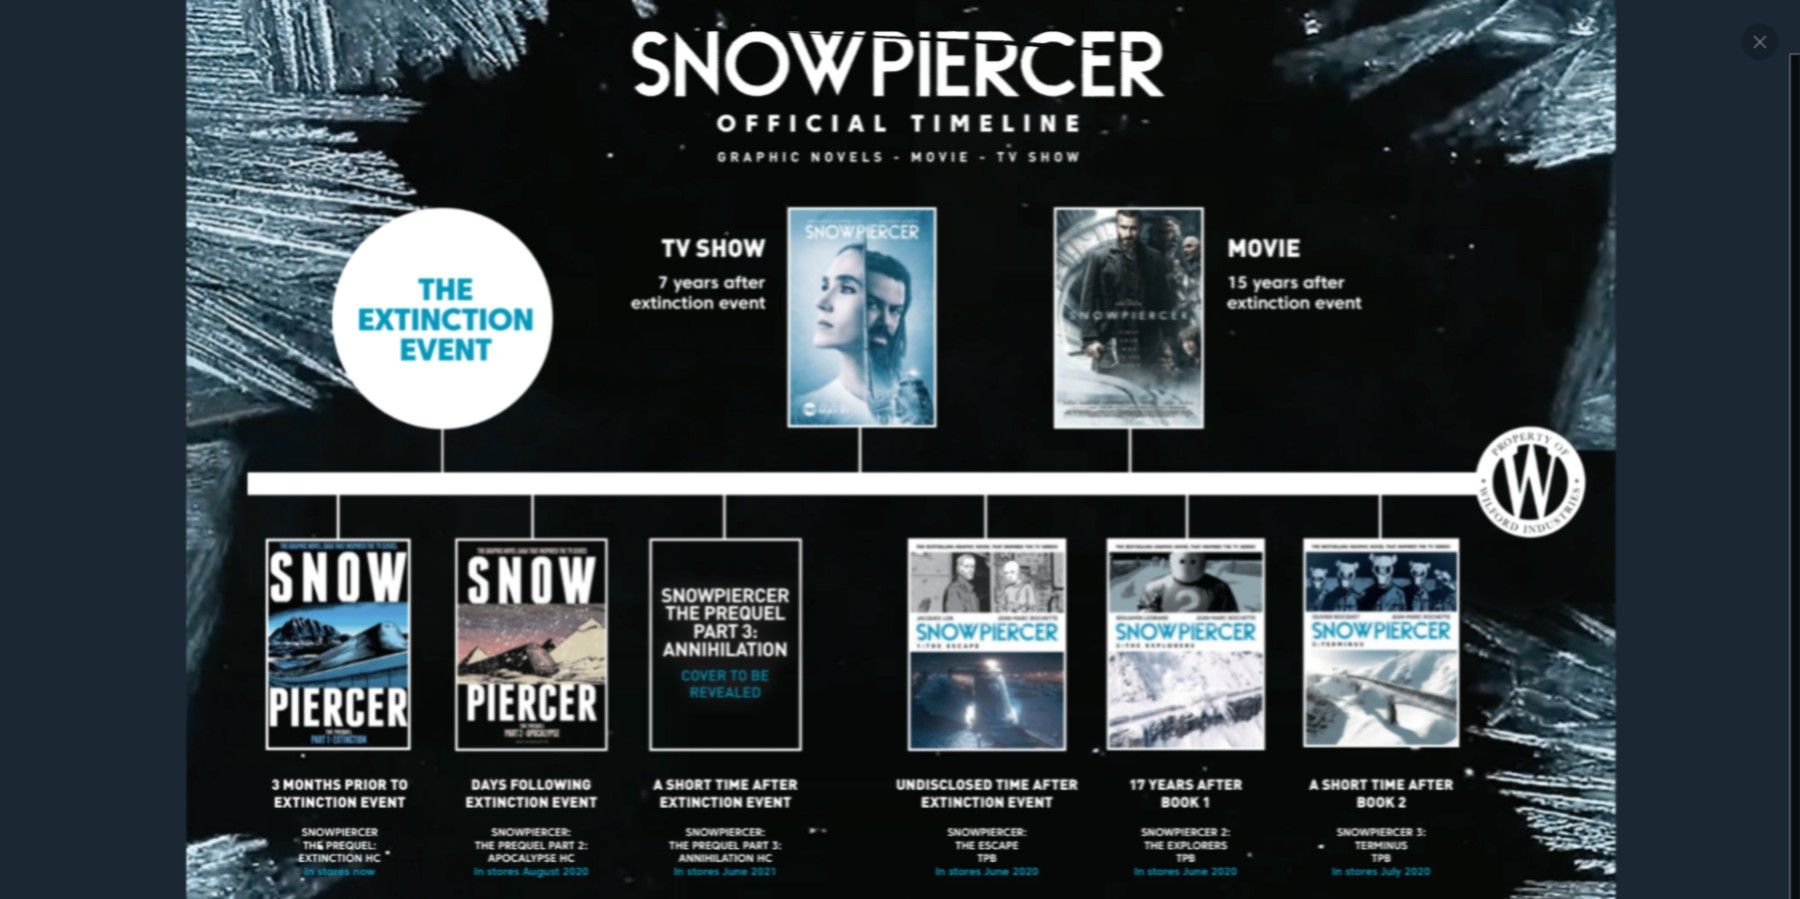 Snowpiercer Timeline Explained: When The Movie & TV Show Take Place